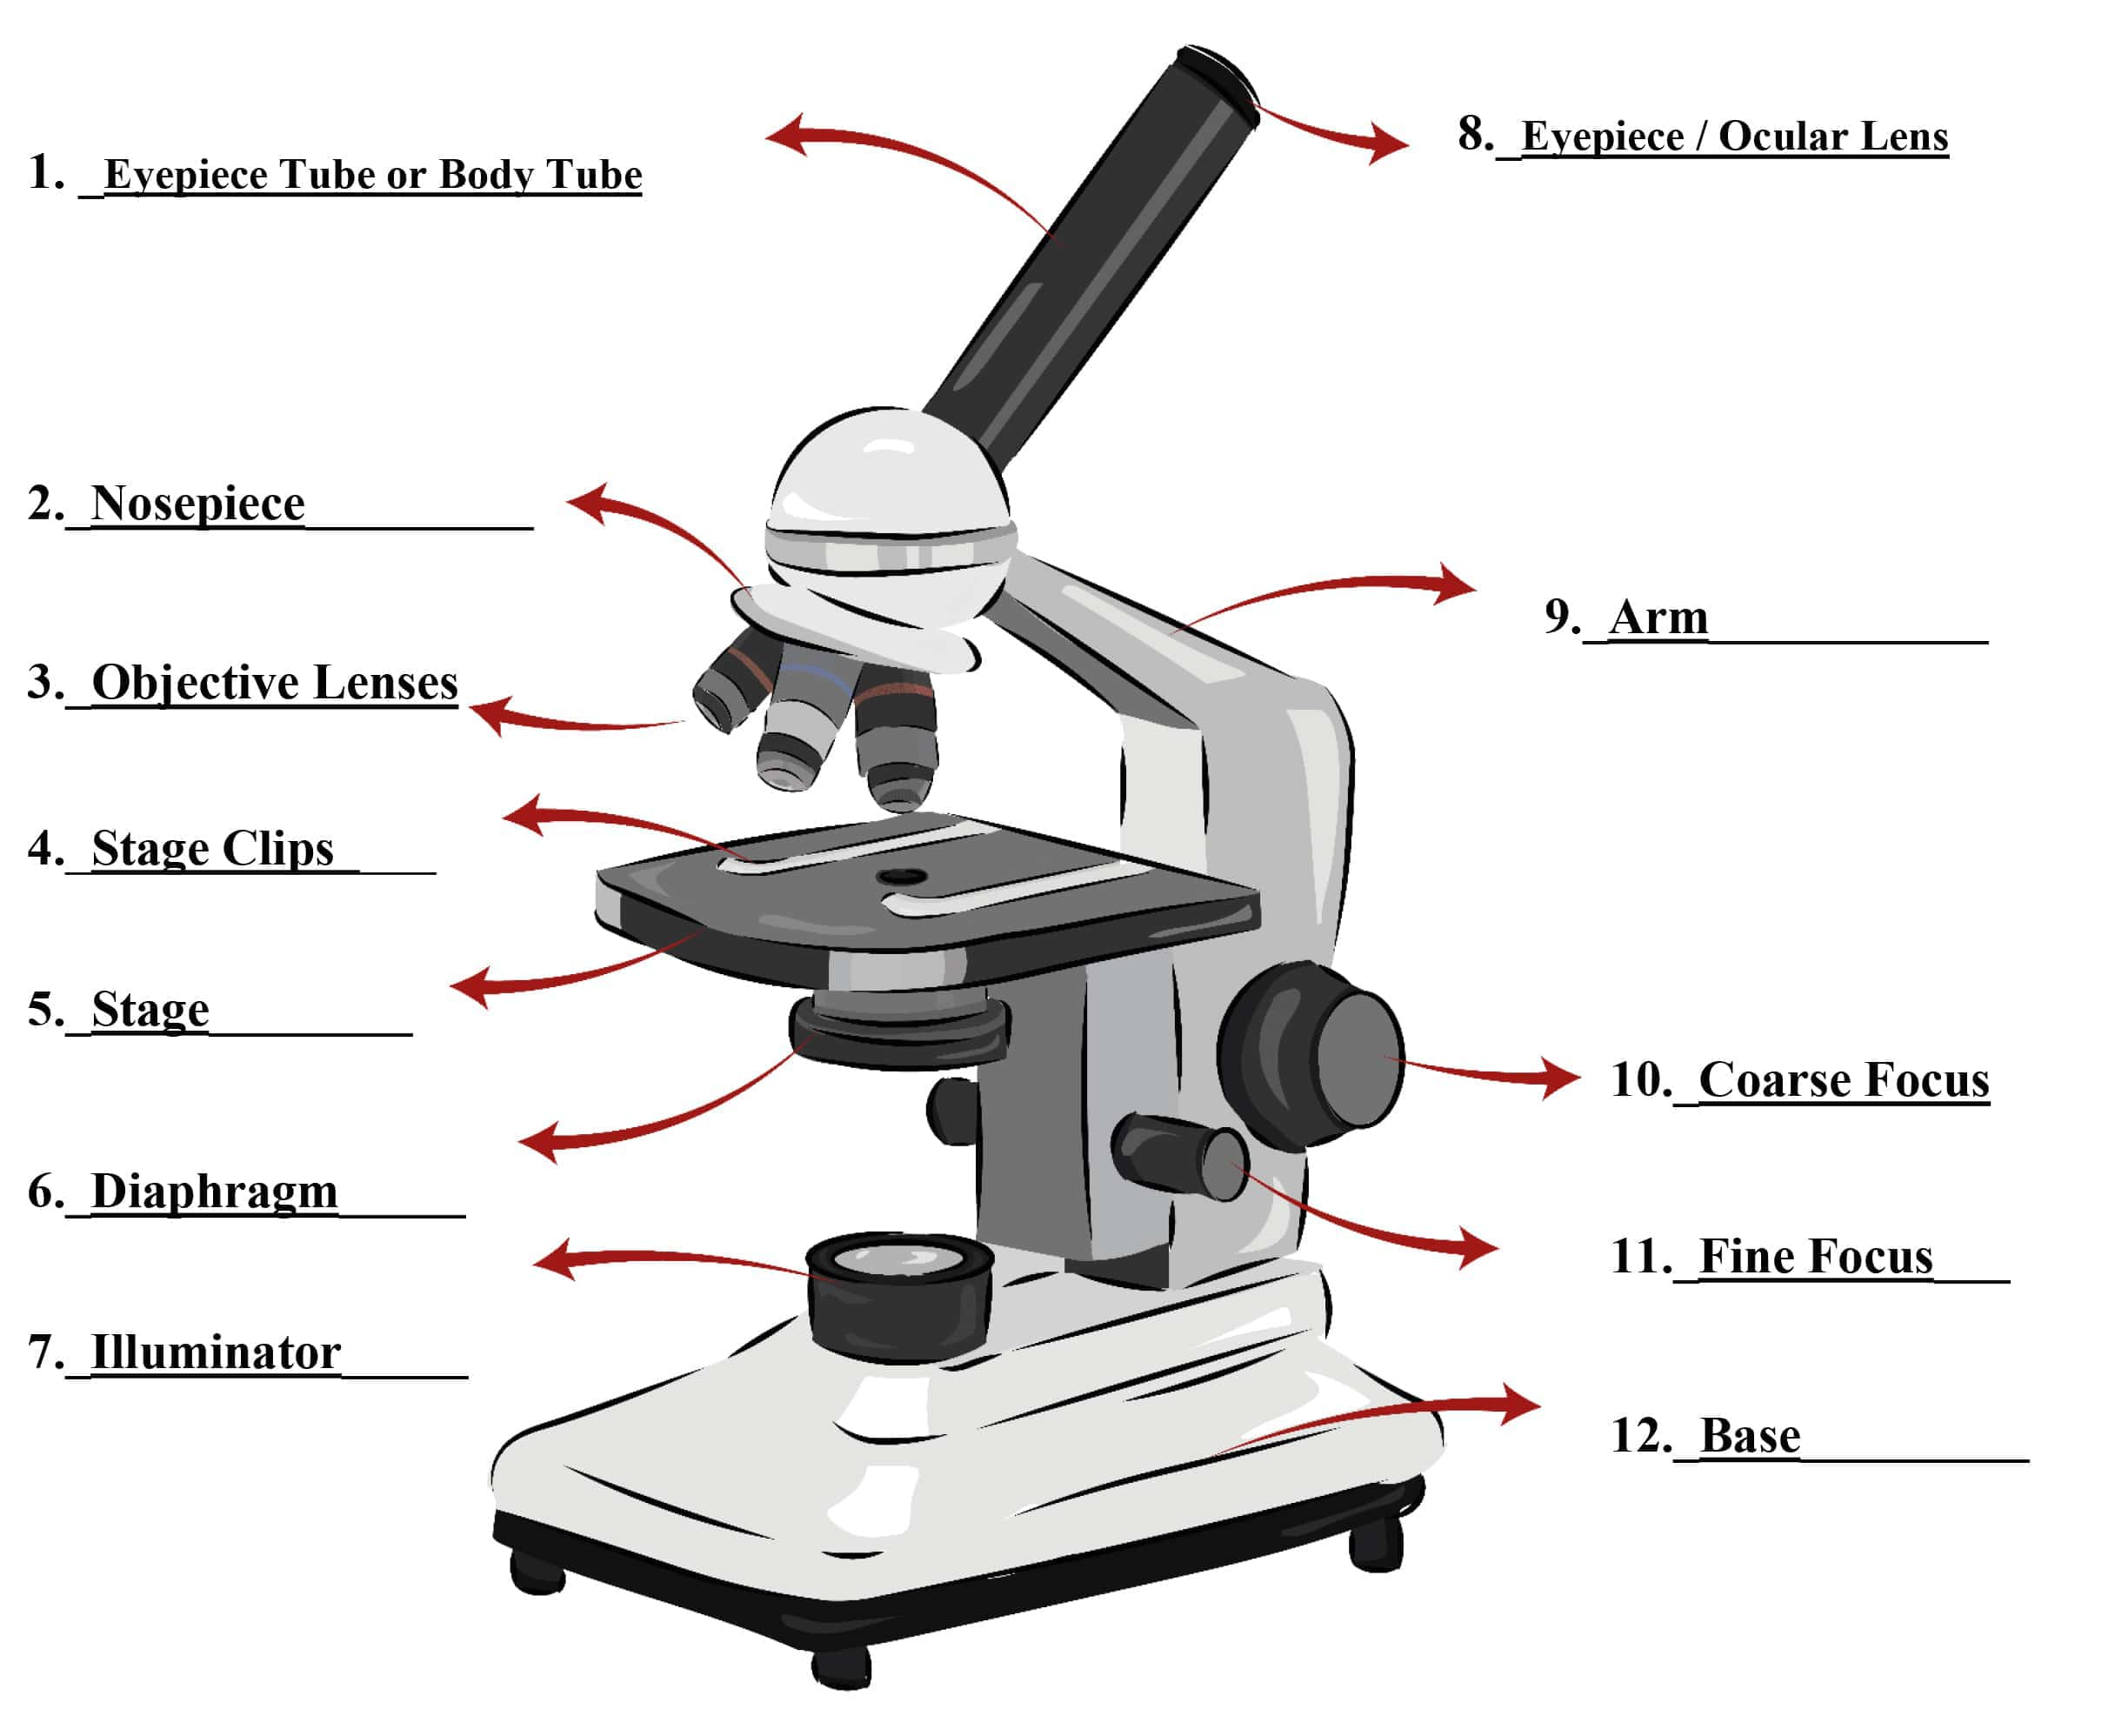 travelling microscope labelled diagram